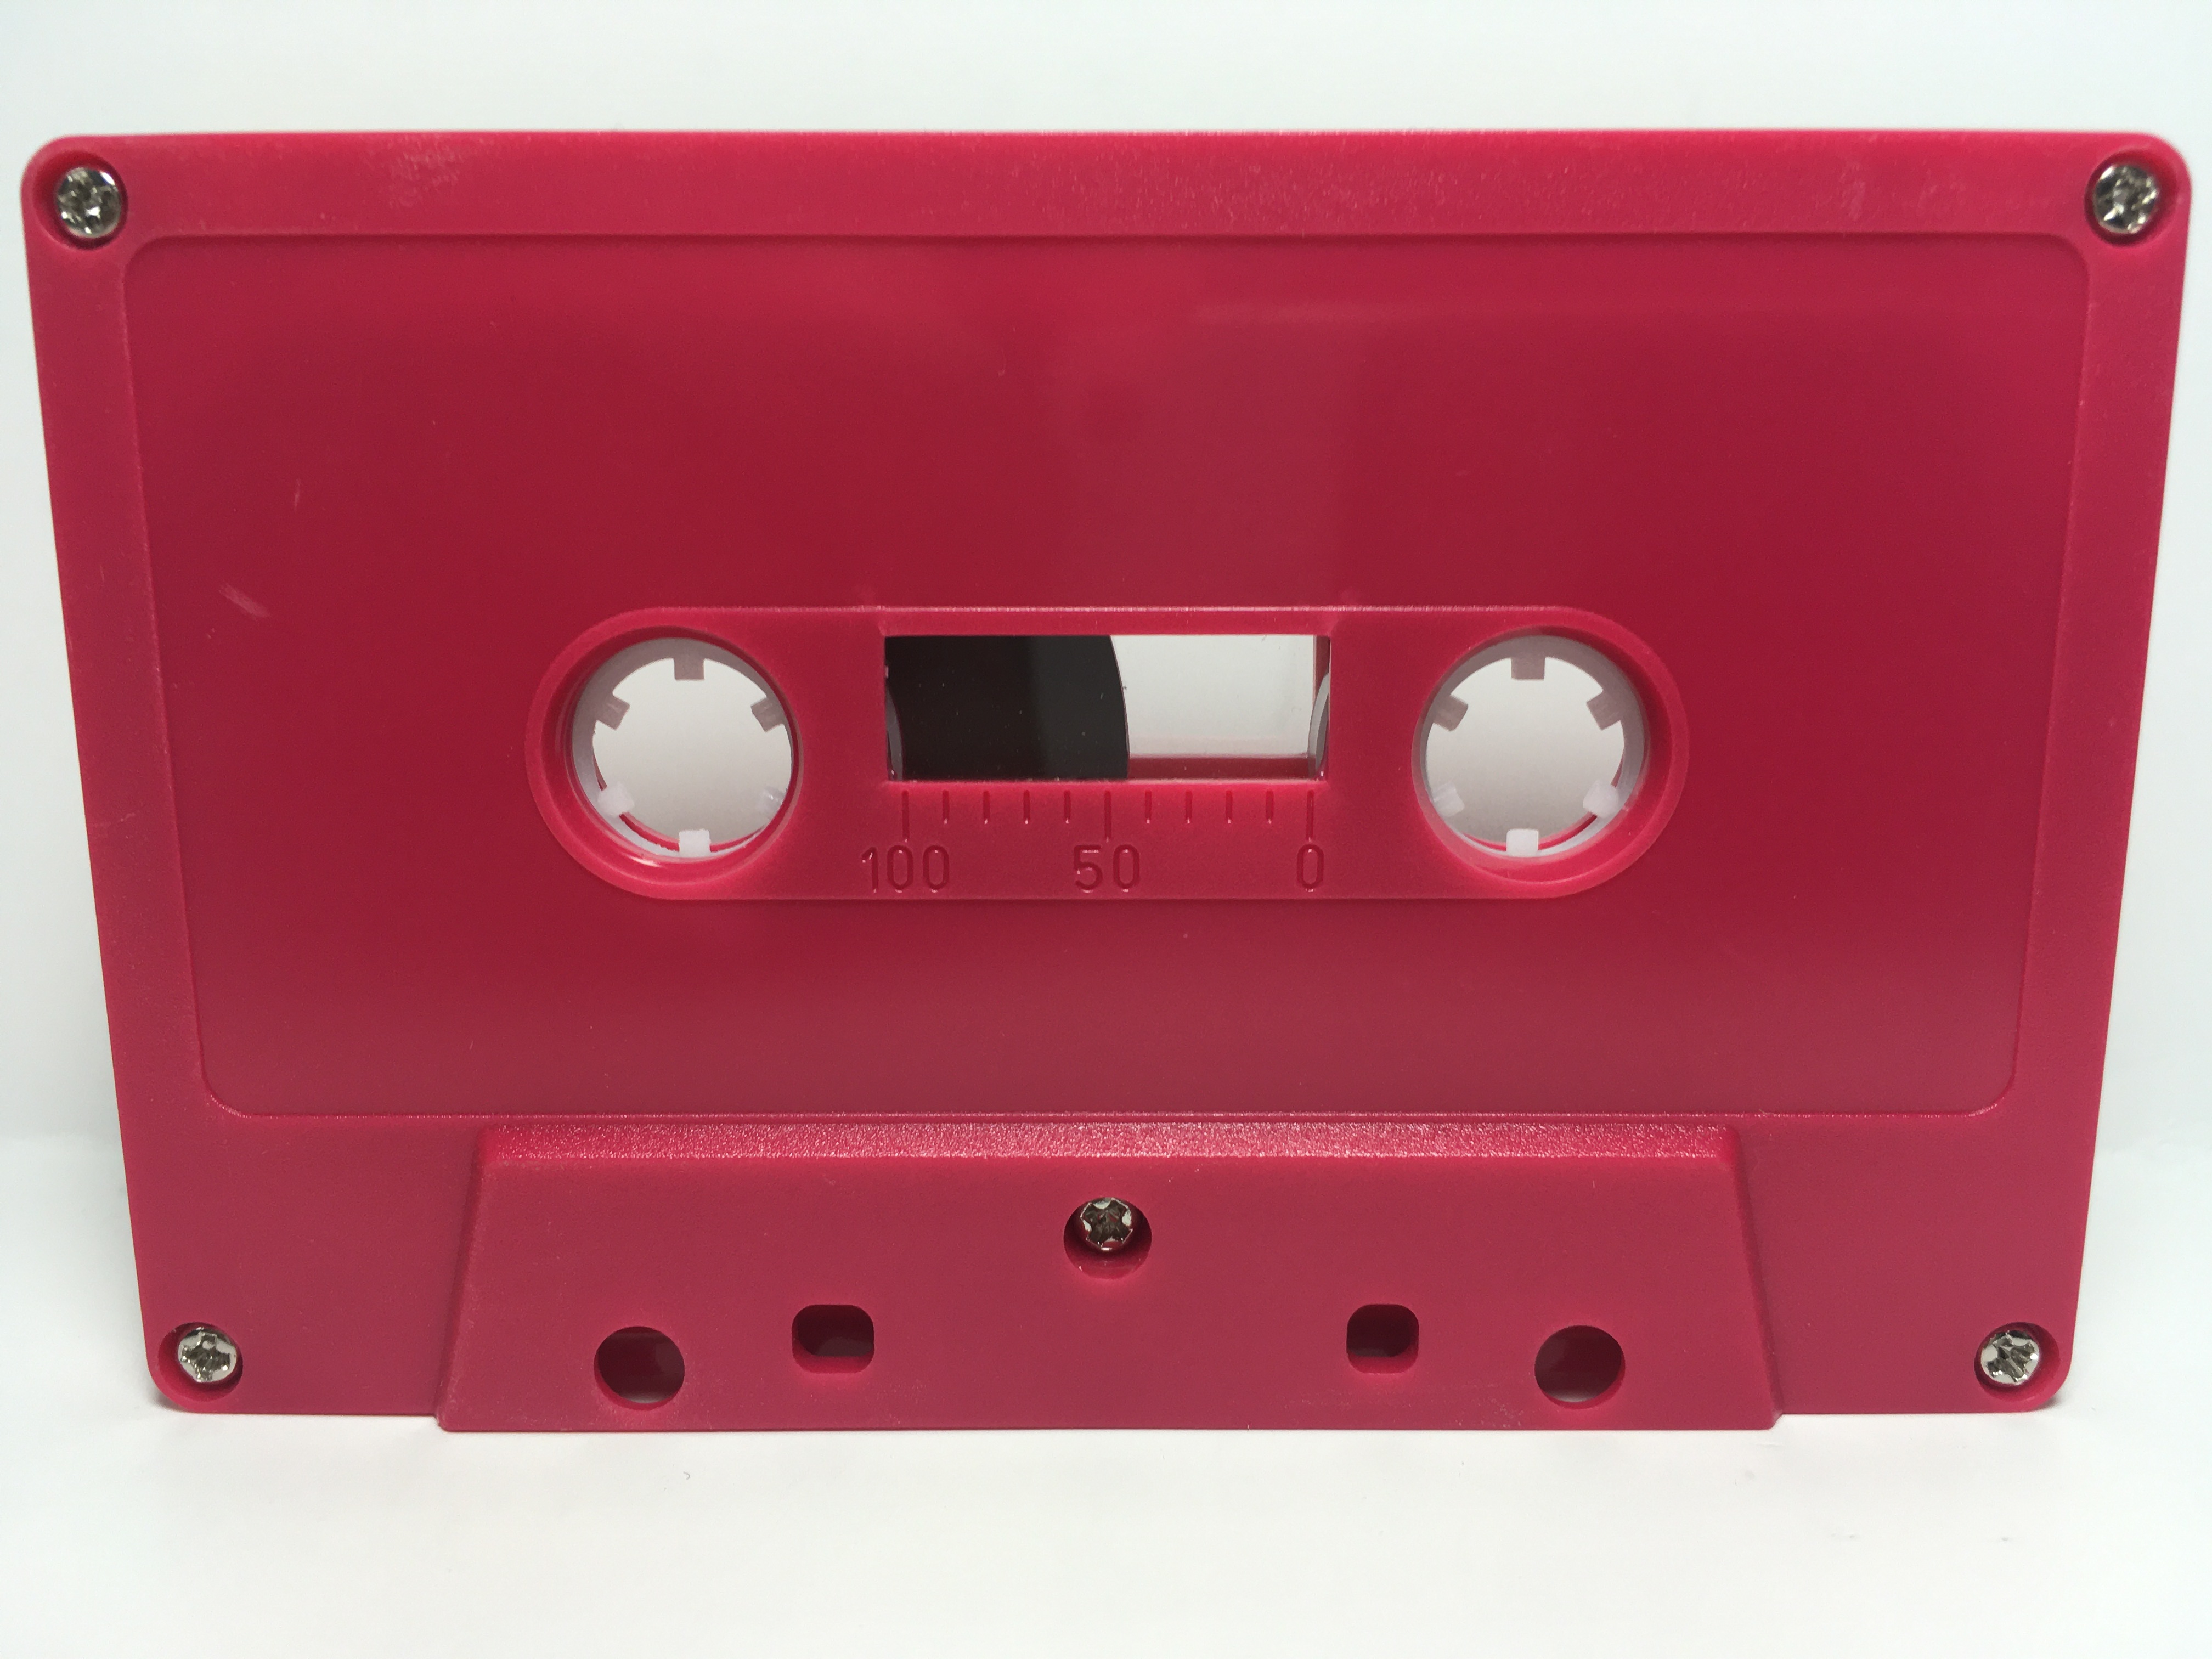 C-19 Normal Bias Red Rubine Cassettes 20 Pack